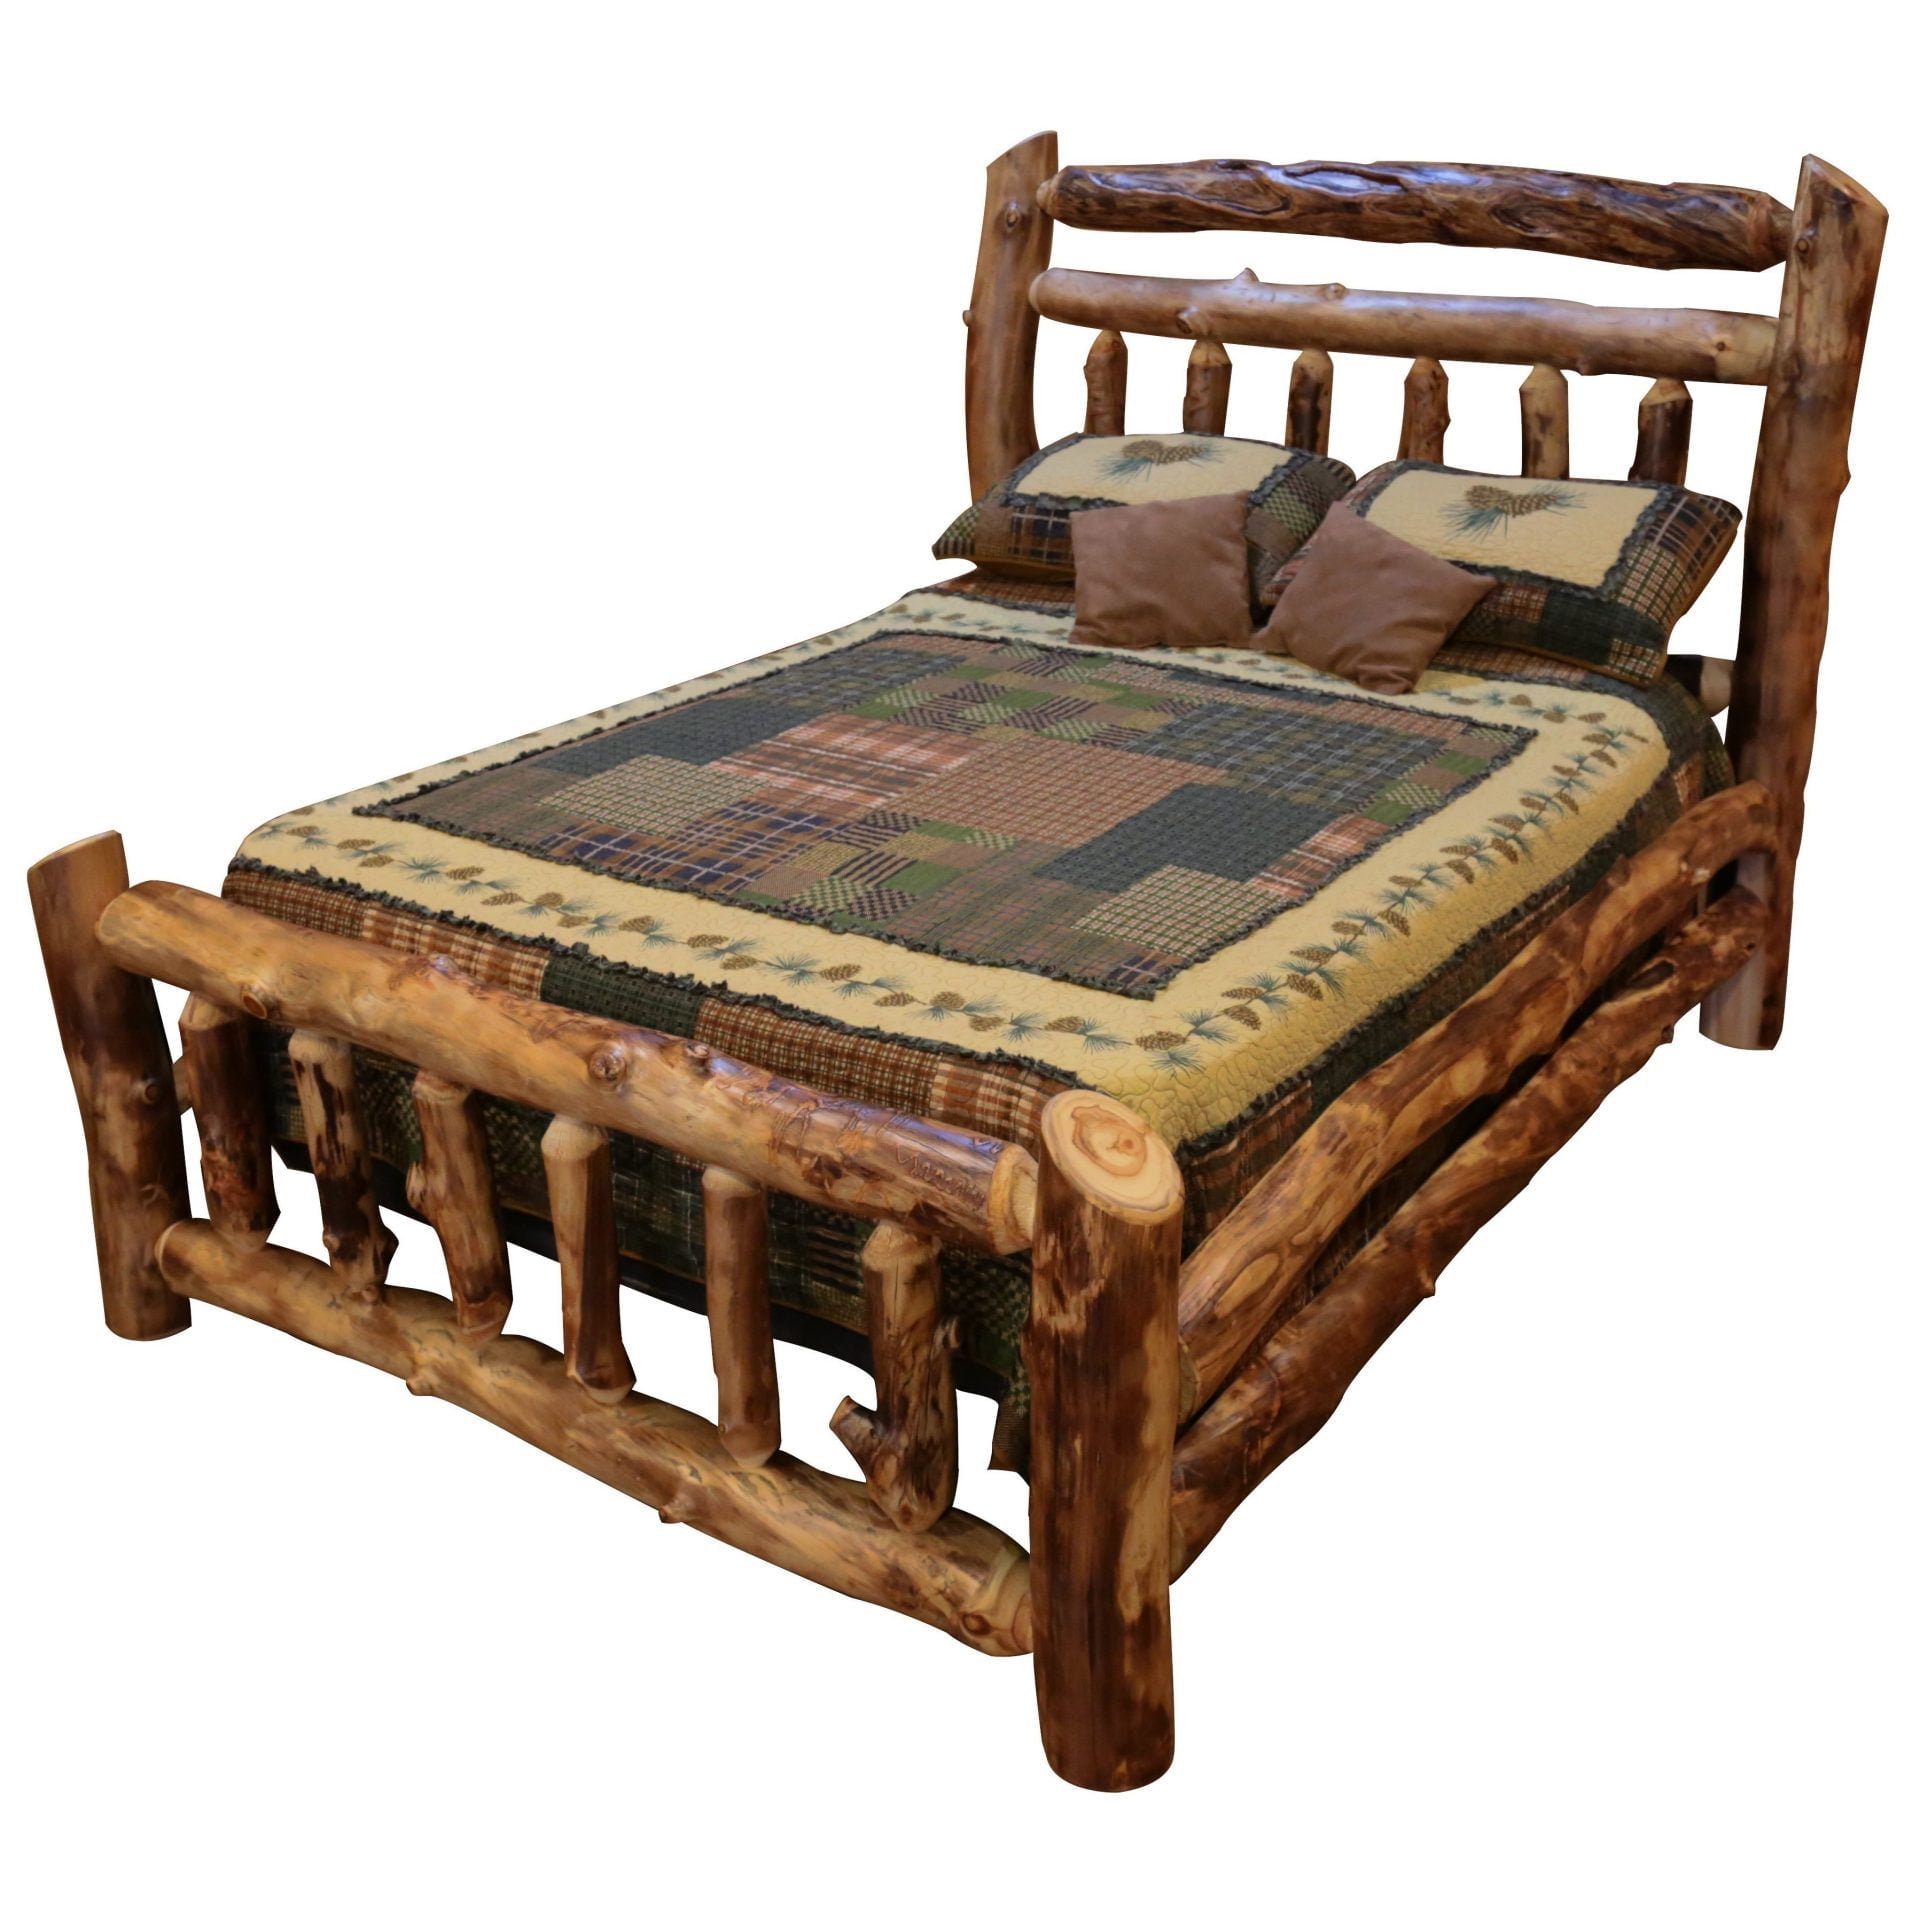 Rustic Aspen Log Mission Style Double Top Rail Bed